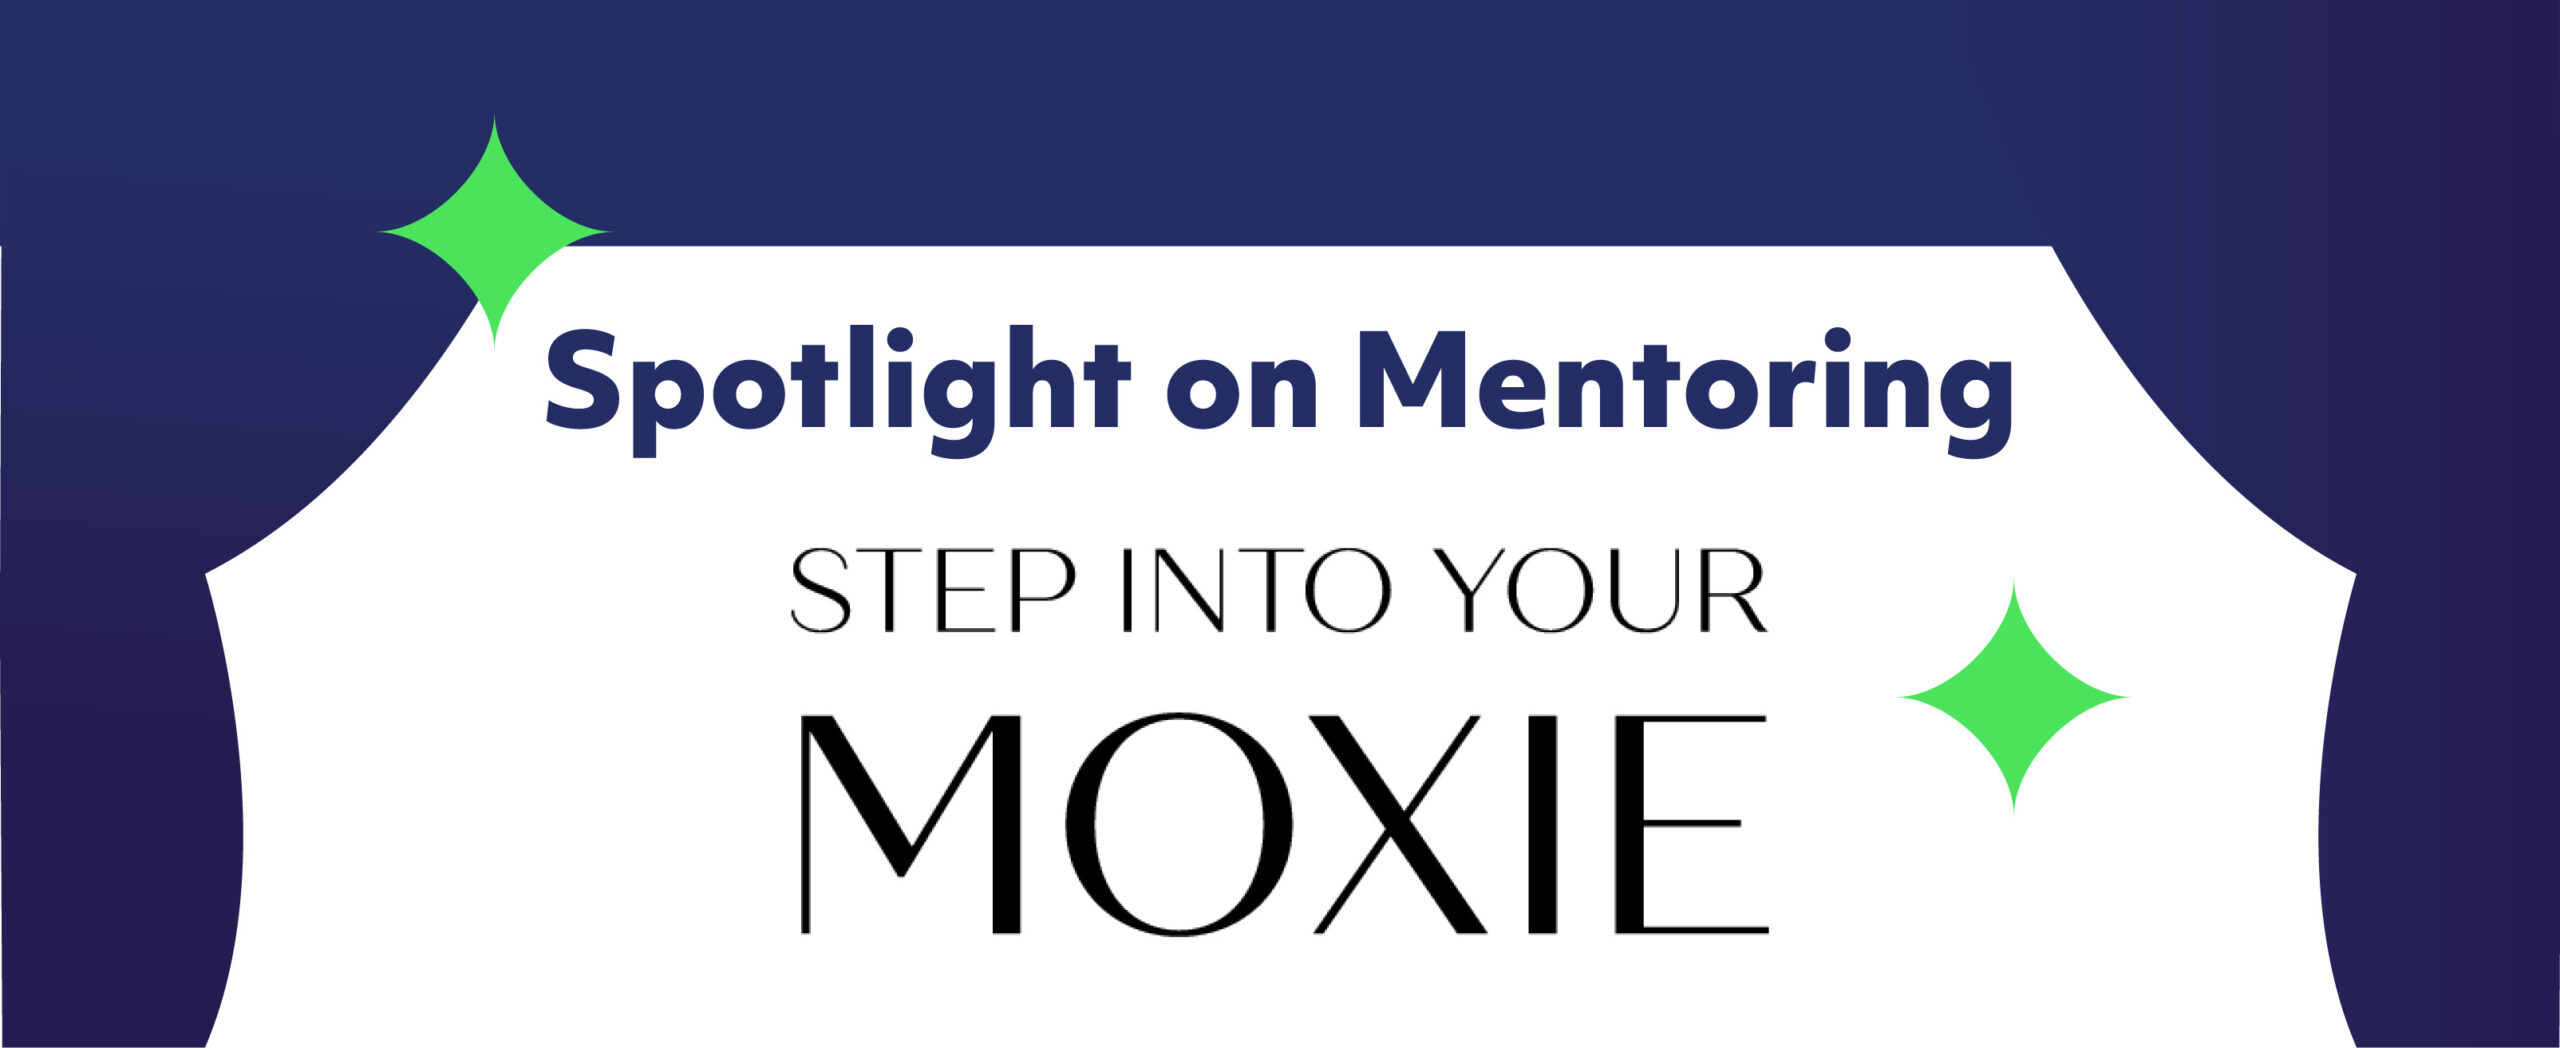 Spotlight on Mentoring with Step into Your Moxie